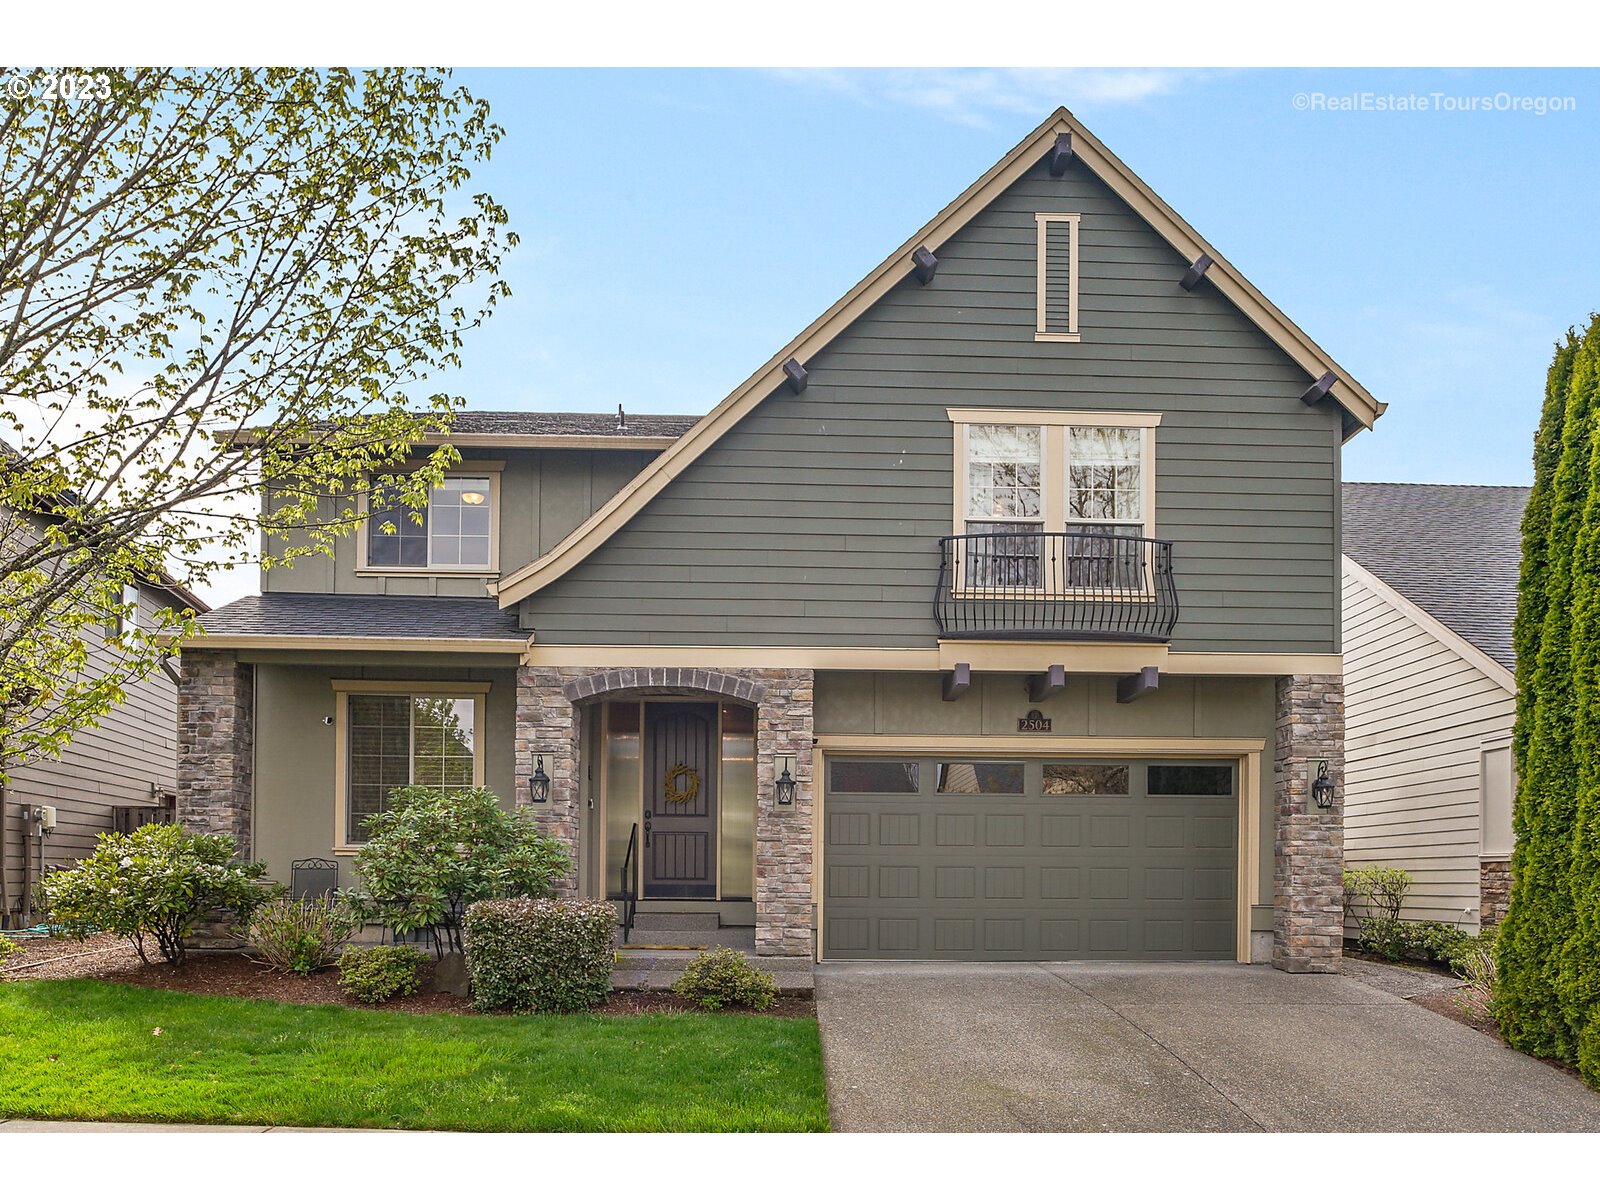 2504 FALLS ST, Forest Grove, OR 